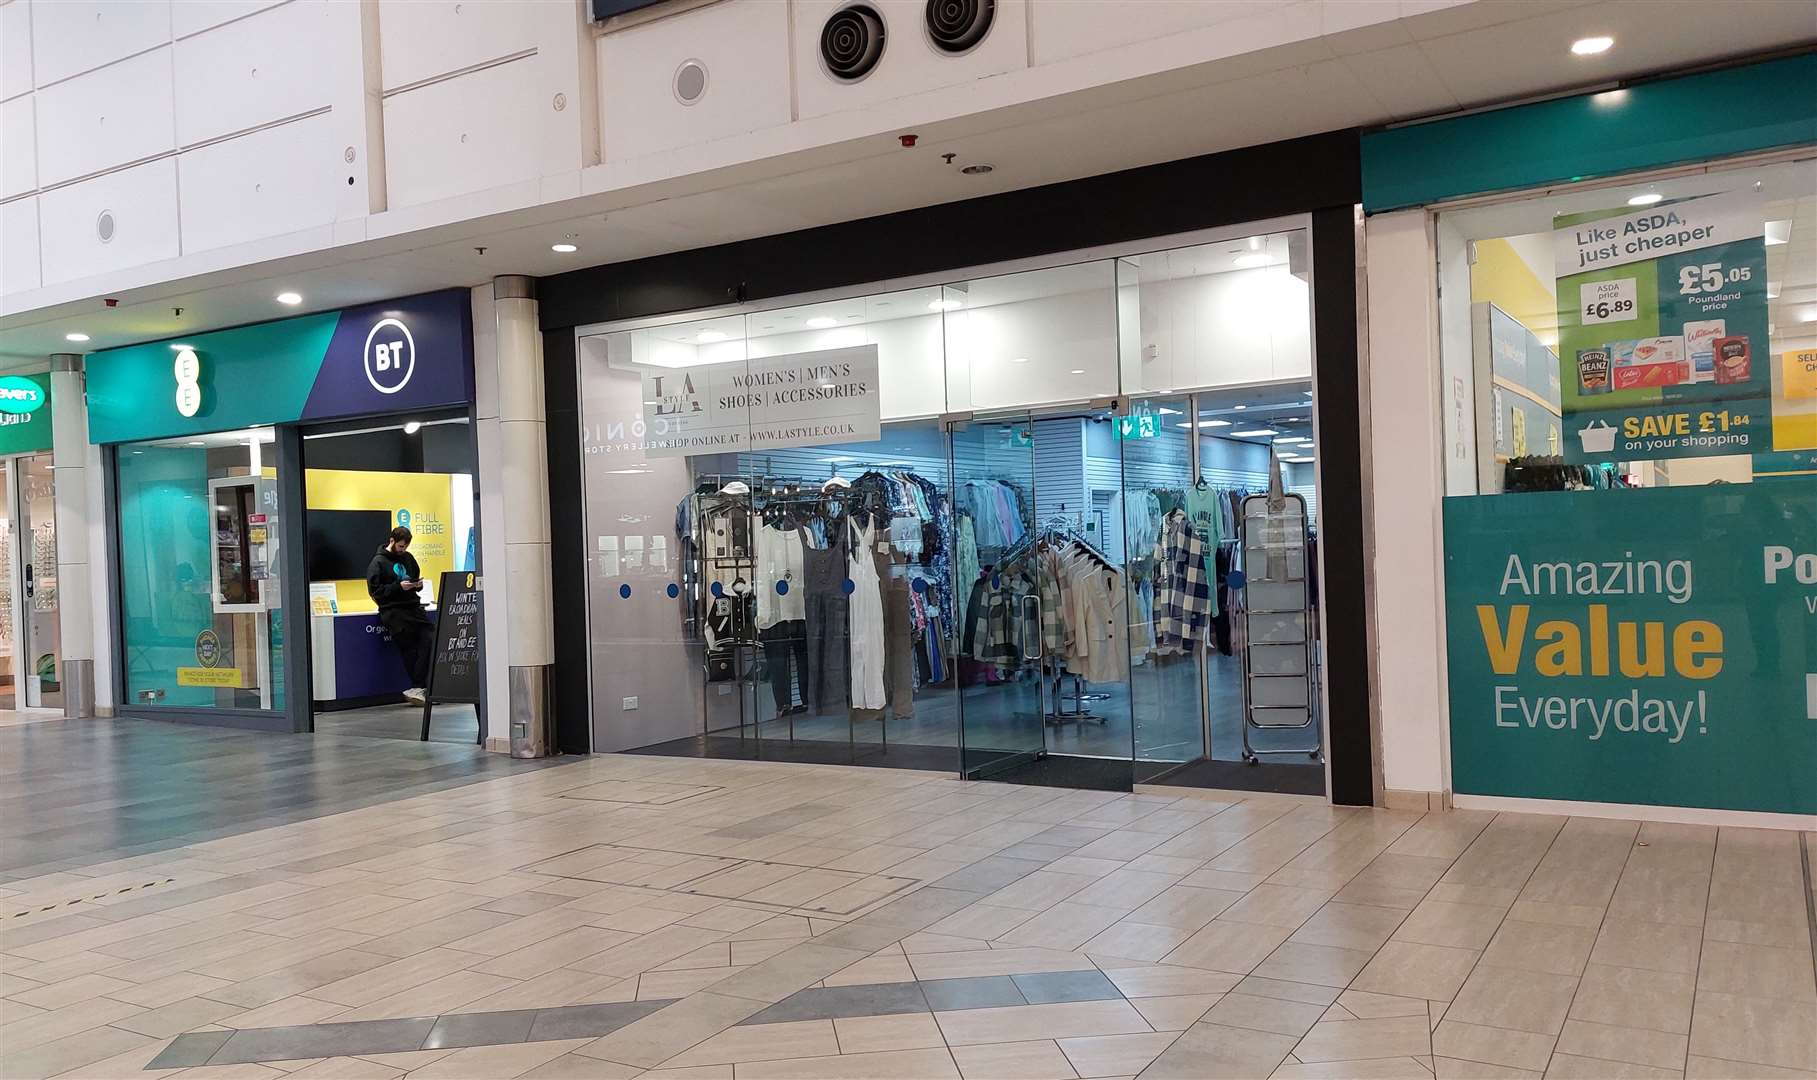 LA Style has filled the empty unit next to Poundland and EE